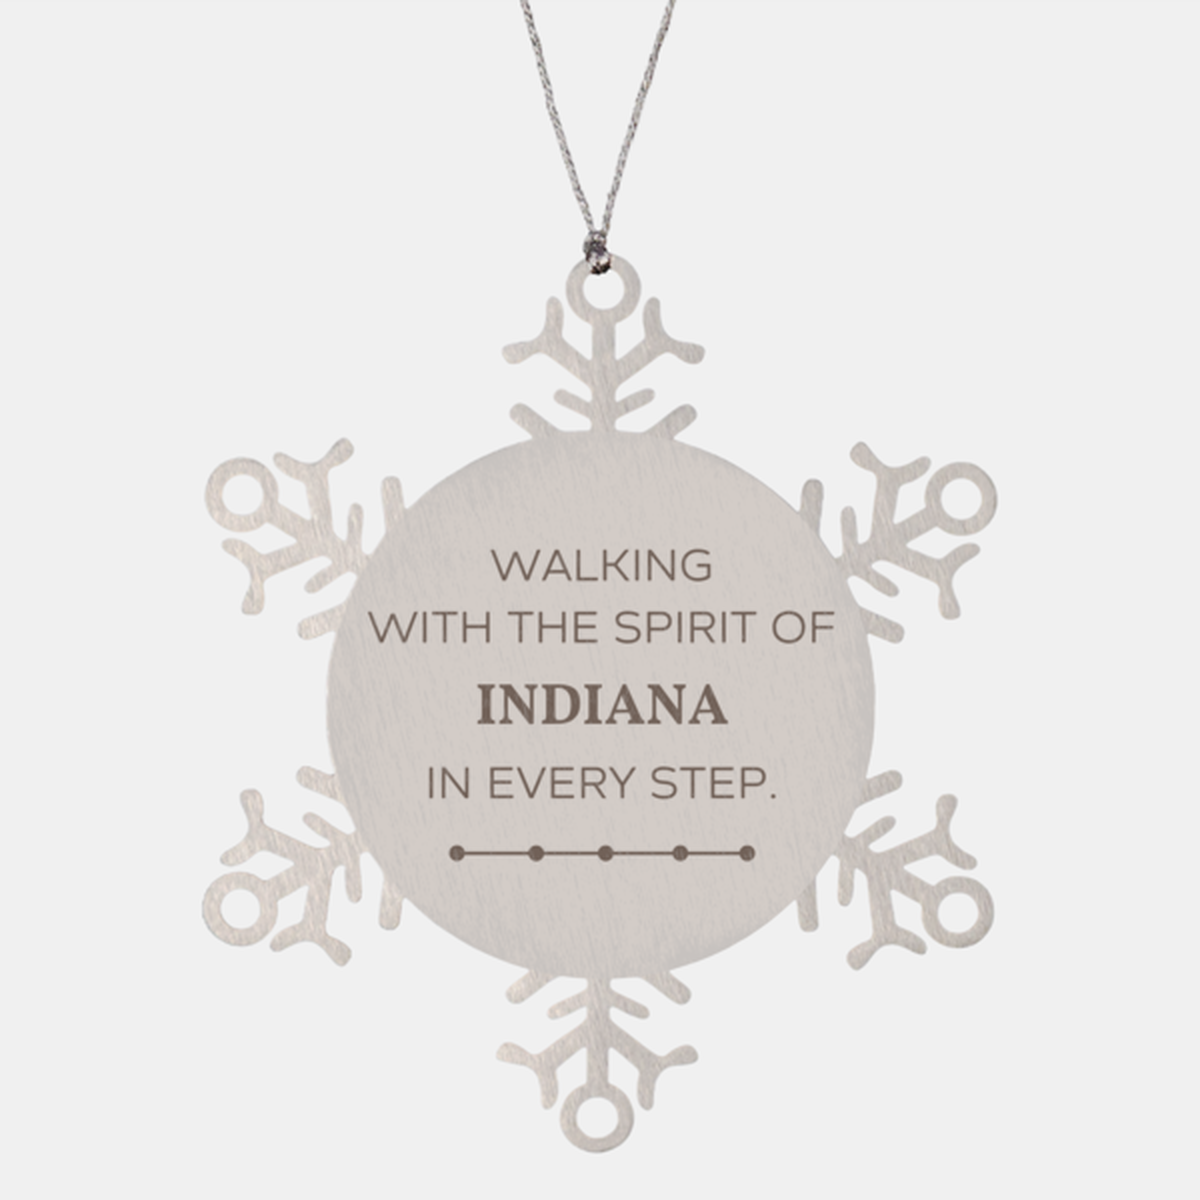 Indiana Gifts, Walking with the spirit, Love Indiana Birthday Christmas Snowflake Ornament For Indiana People, Men, Women, Friends